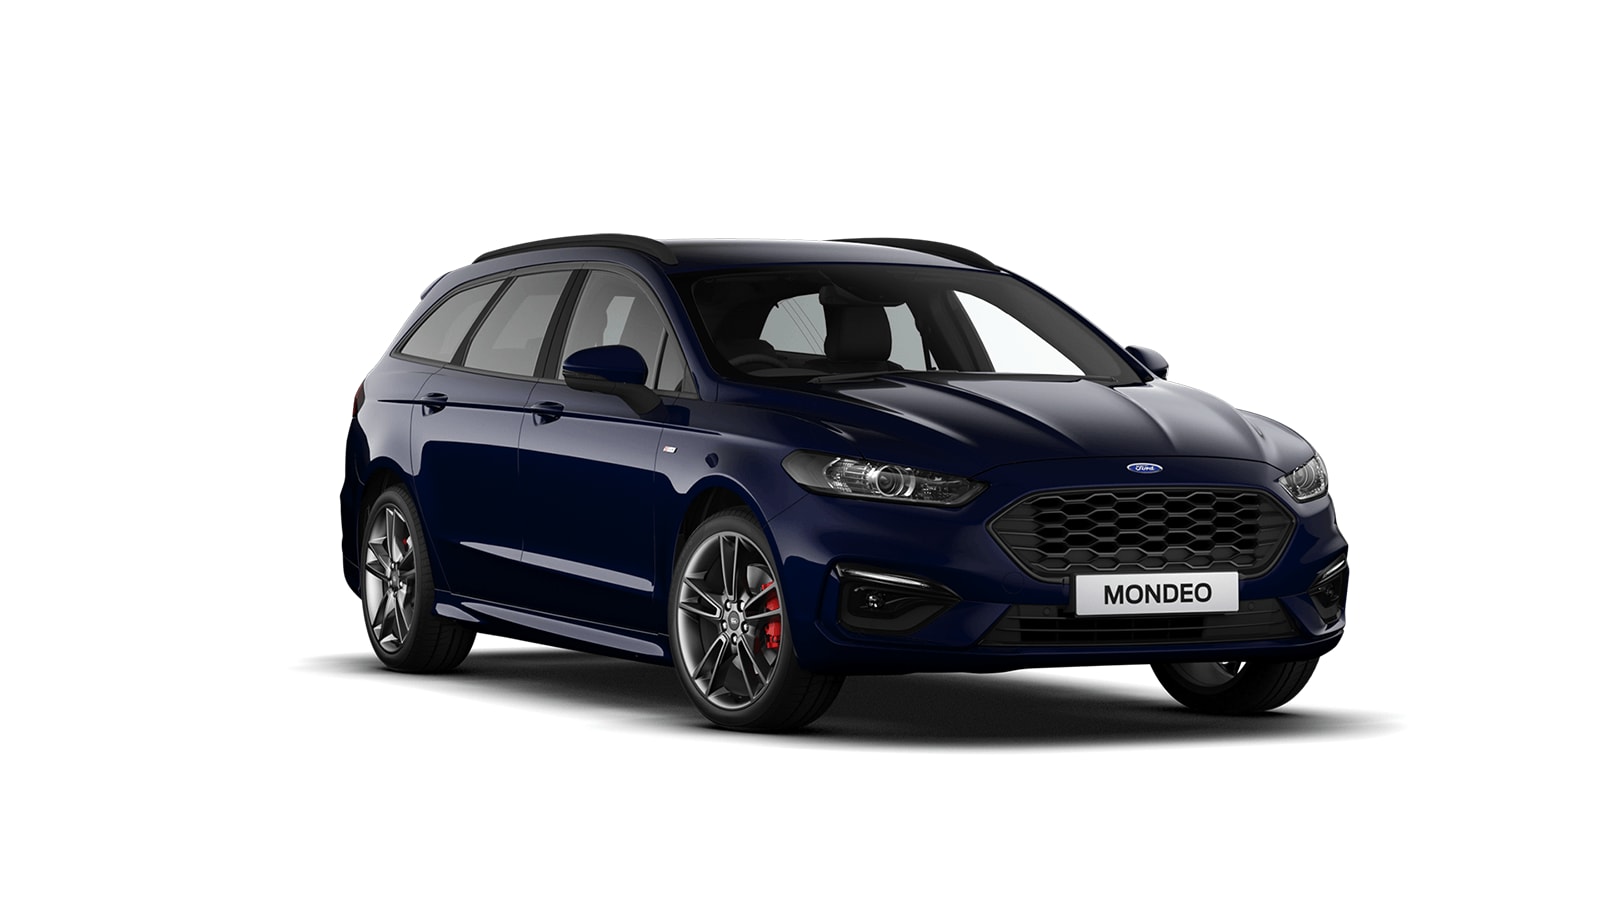 Ford Mondeo ST-Line Edition 2.0L EcoBlue 190PS at RGR Garages